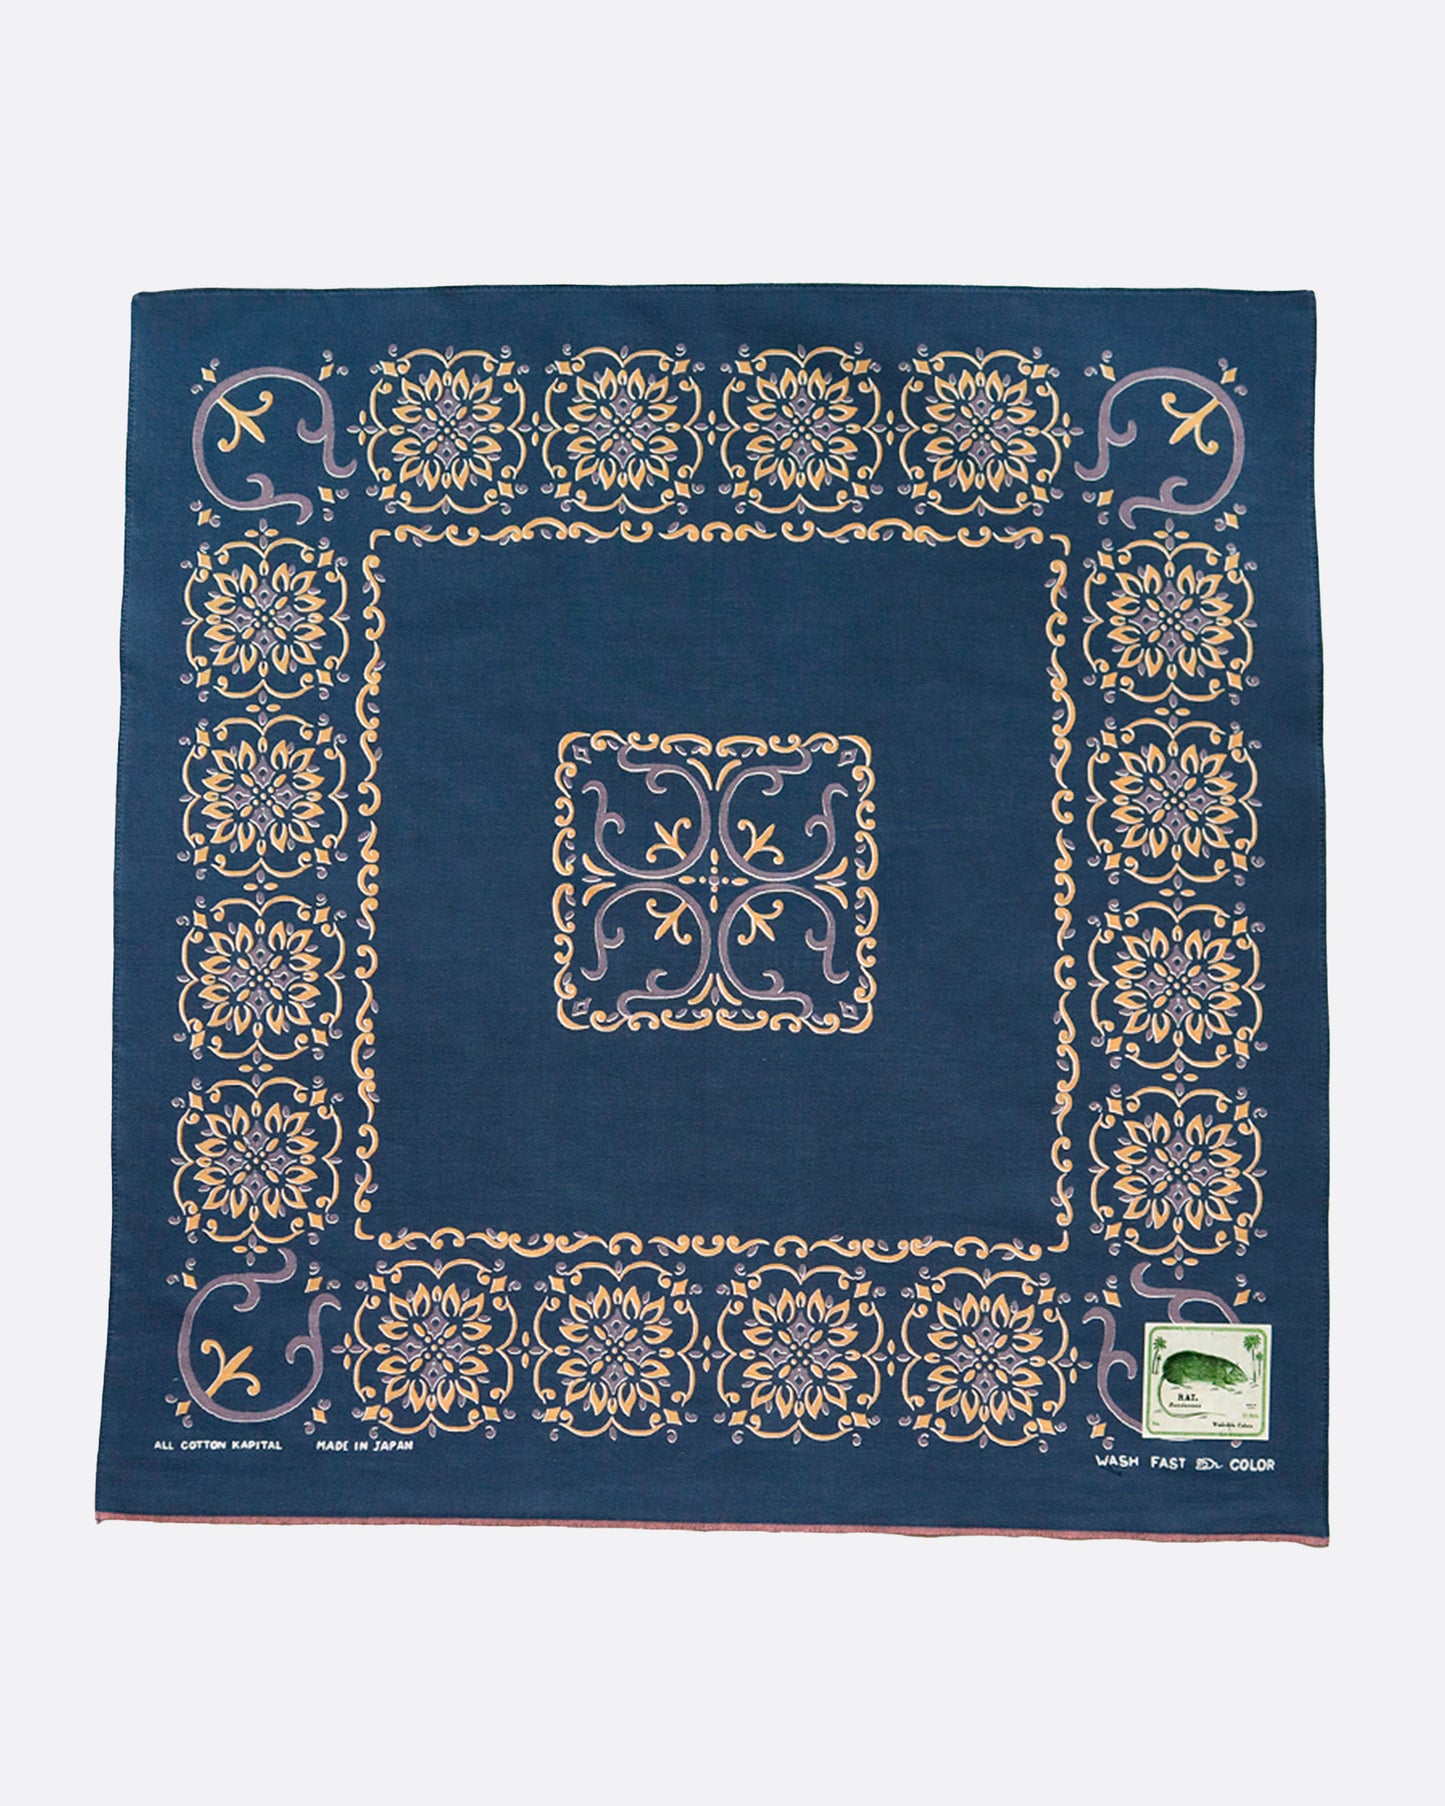 A fastcolor selvedge bandana with a nod to Native American jewelry, more specifically the Naja and its connection to mother earth.